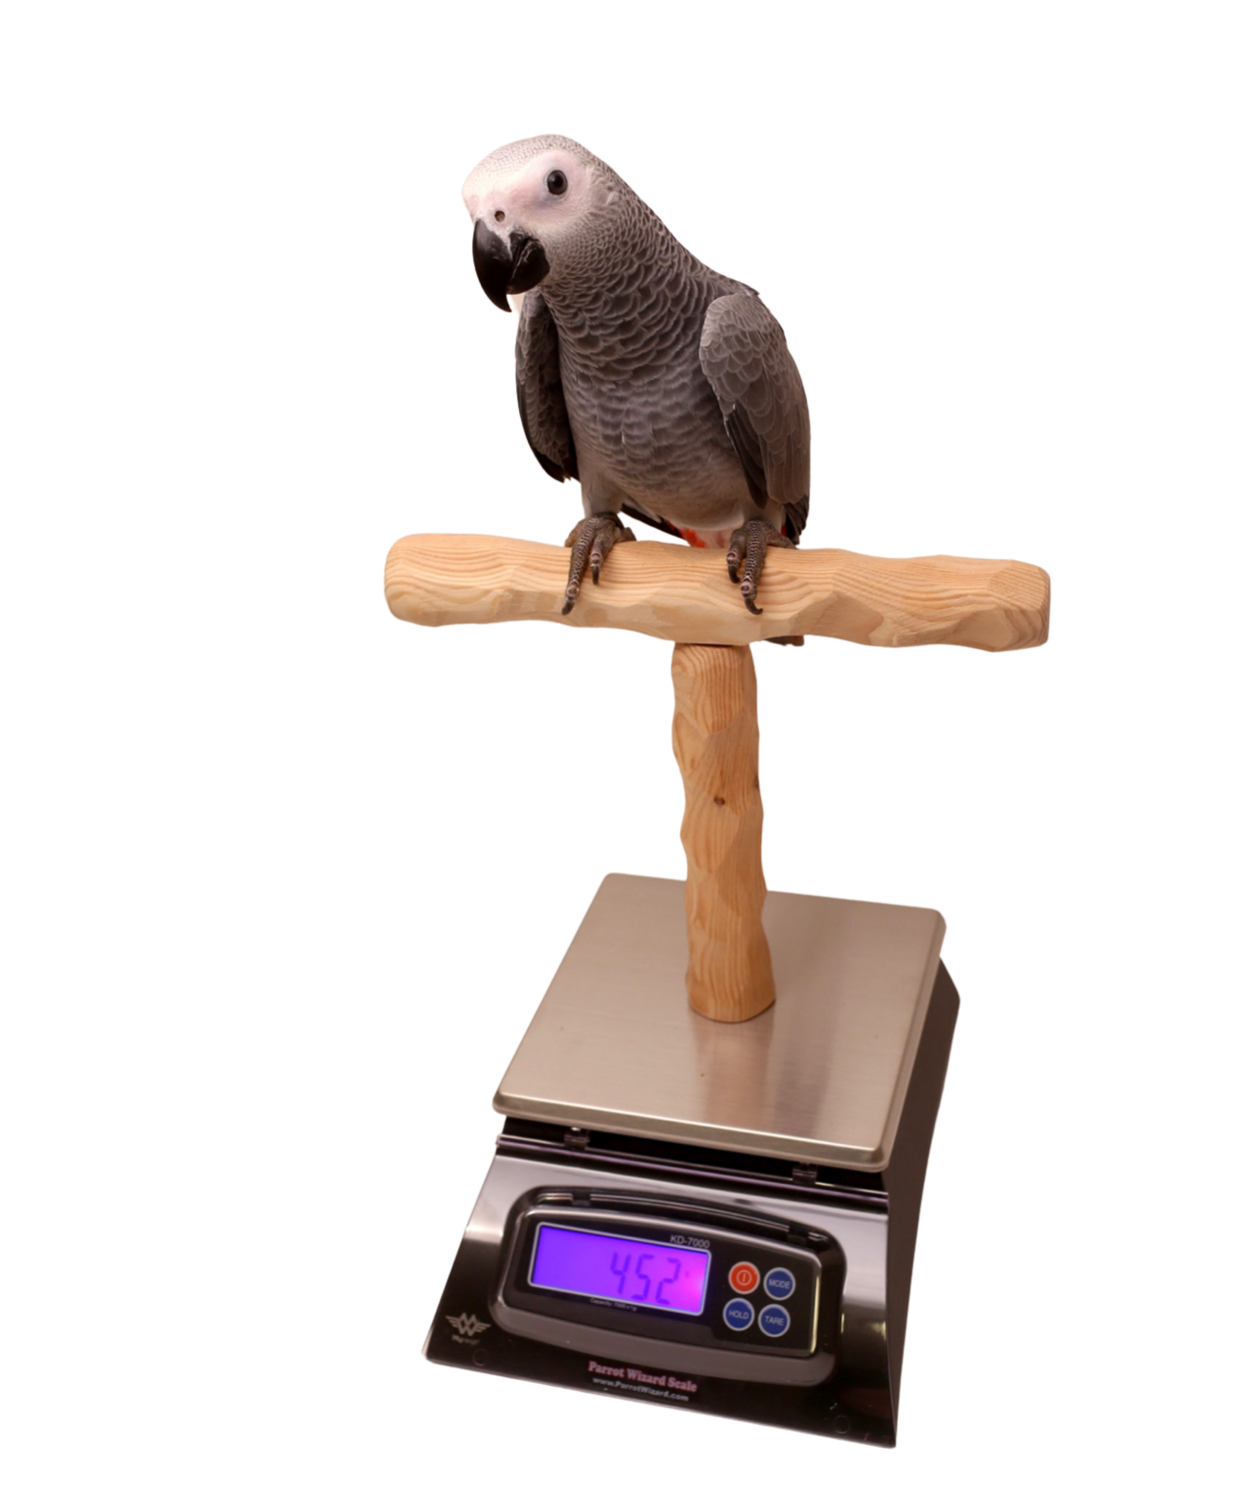 Nu Perch Parrot Training Scale - For all Sized Parrots